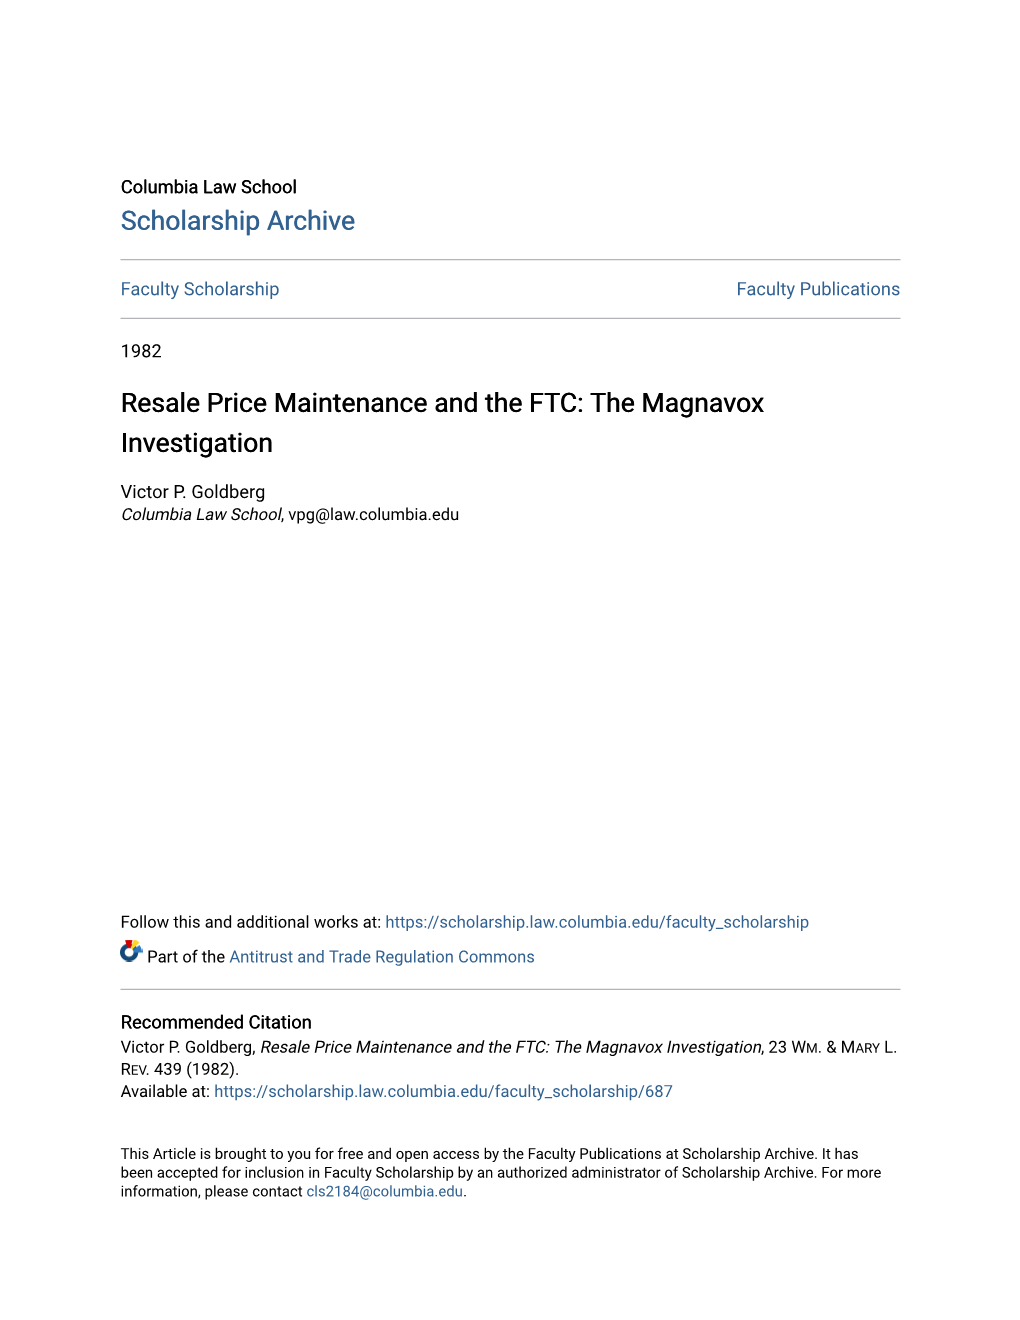 Resale Price Maintenance and the FTC: the Magnavox Investigation